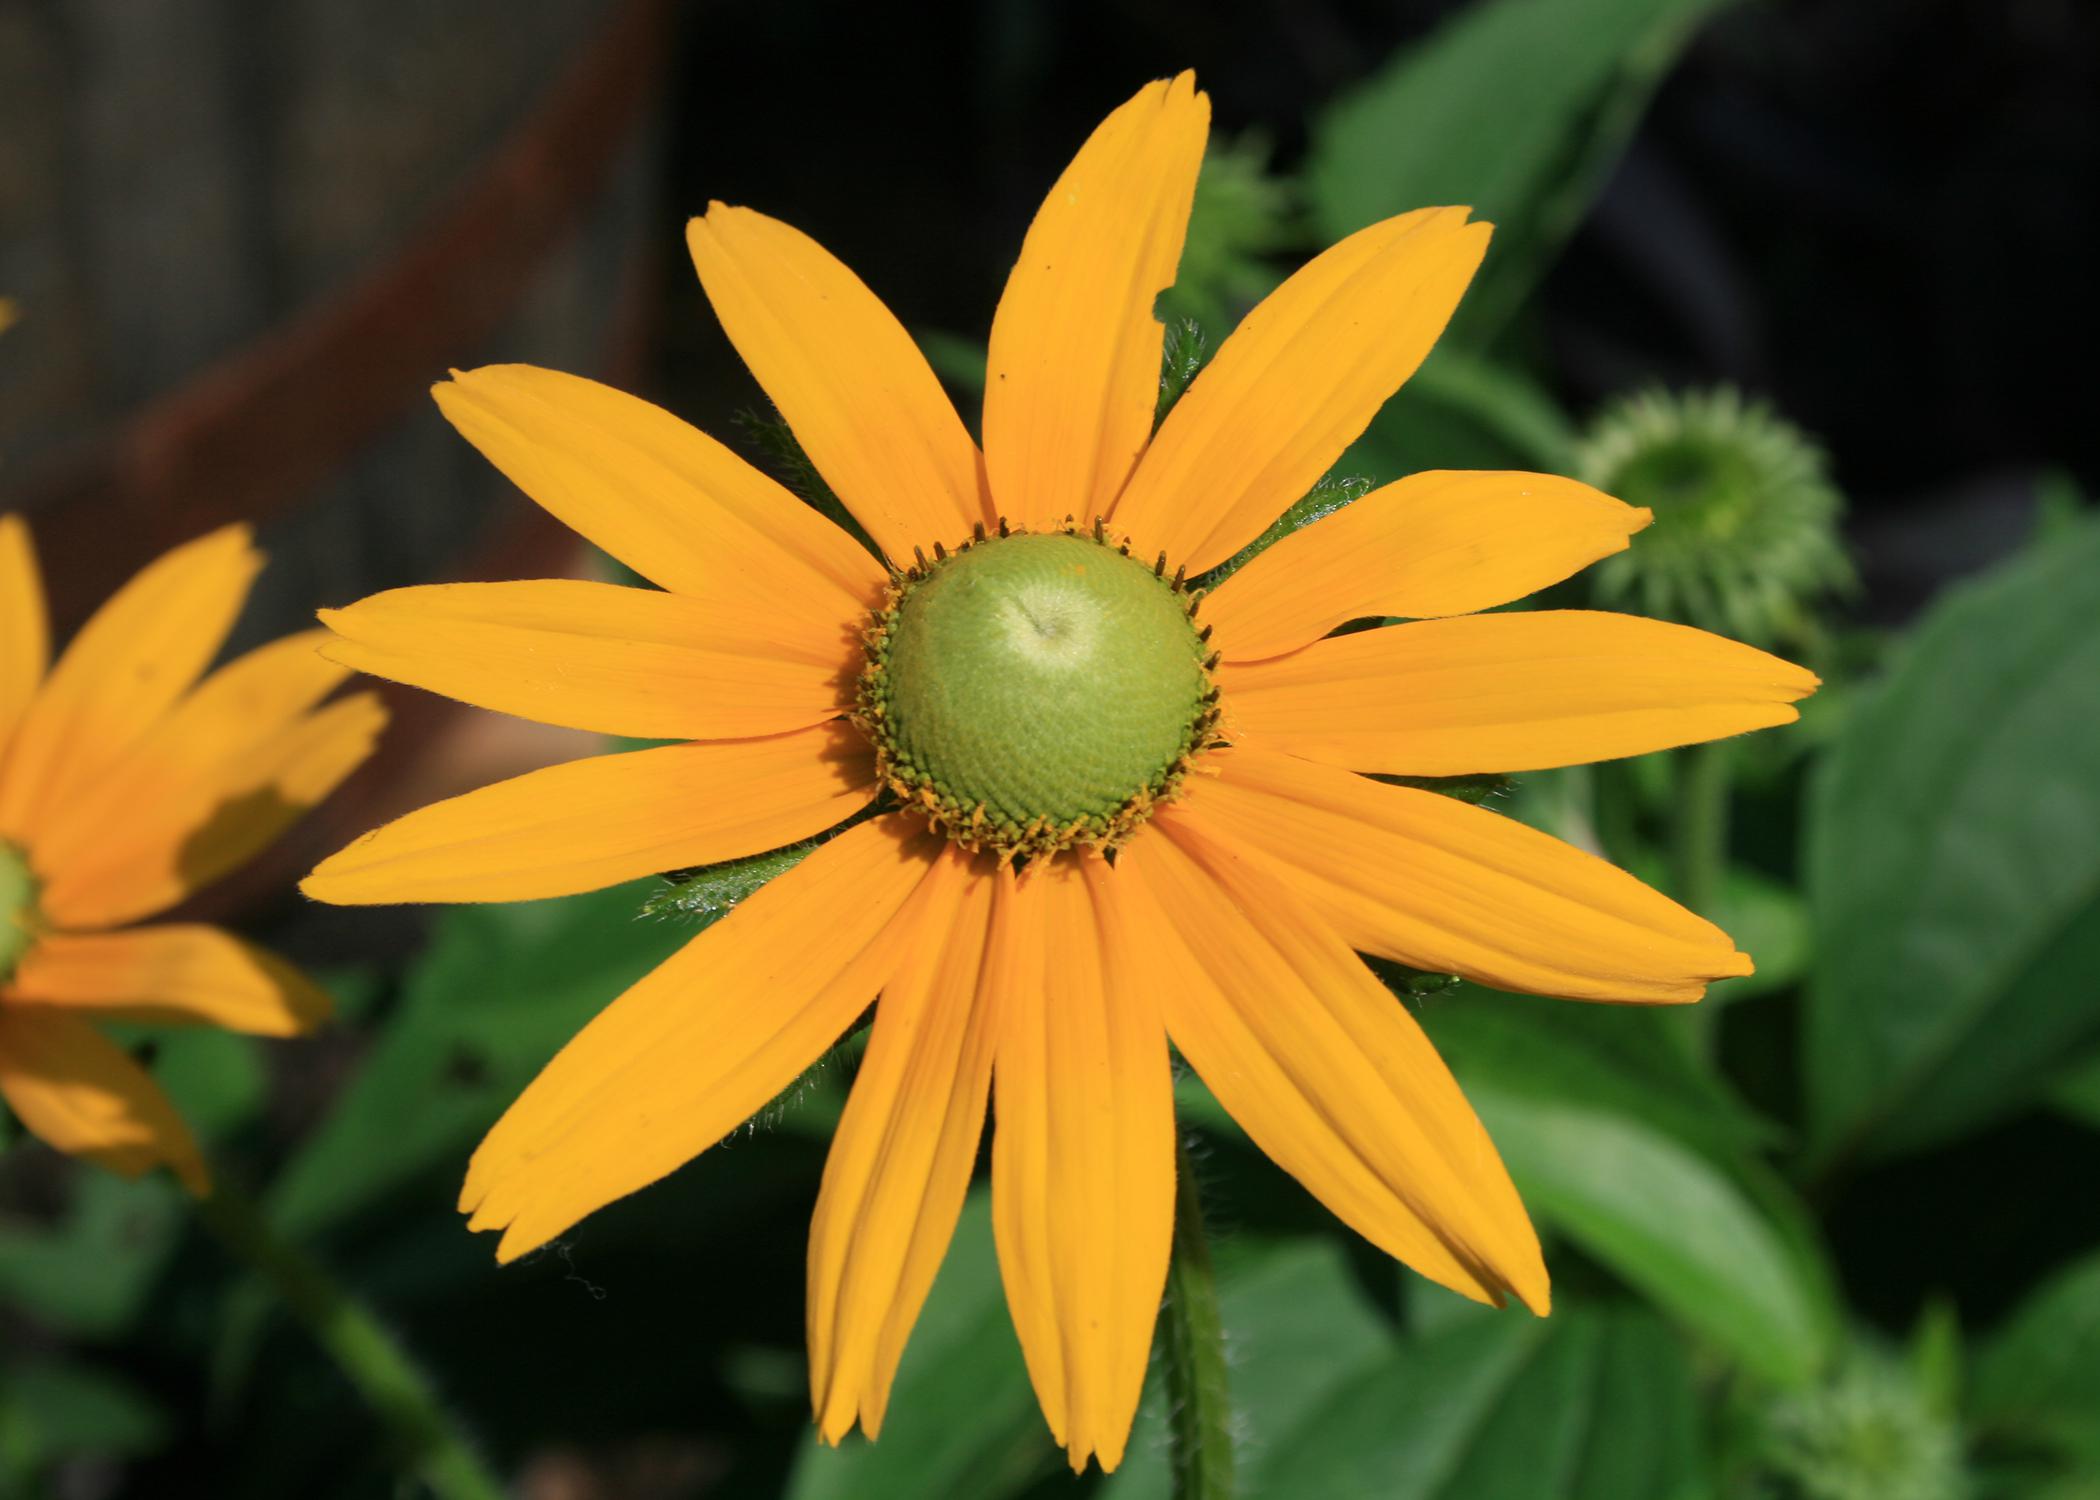 A single flower with yellow petals and a green center blooms above green foliage.